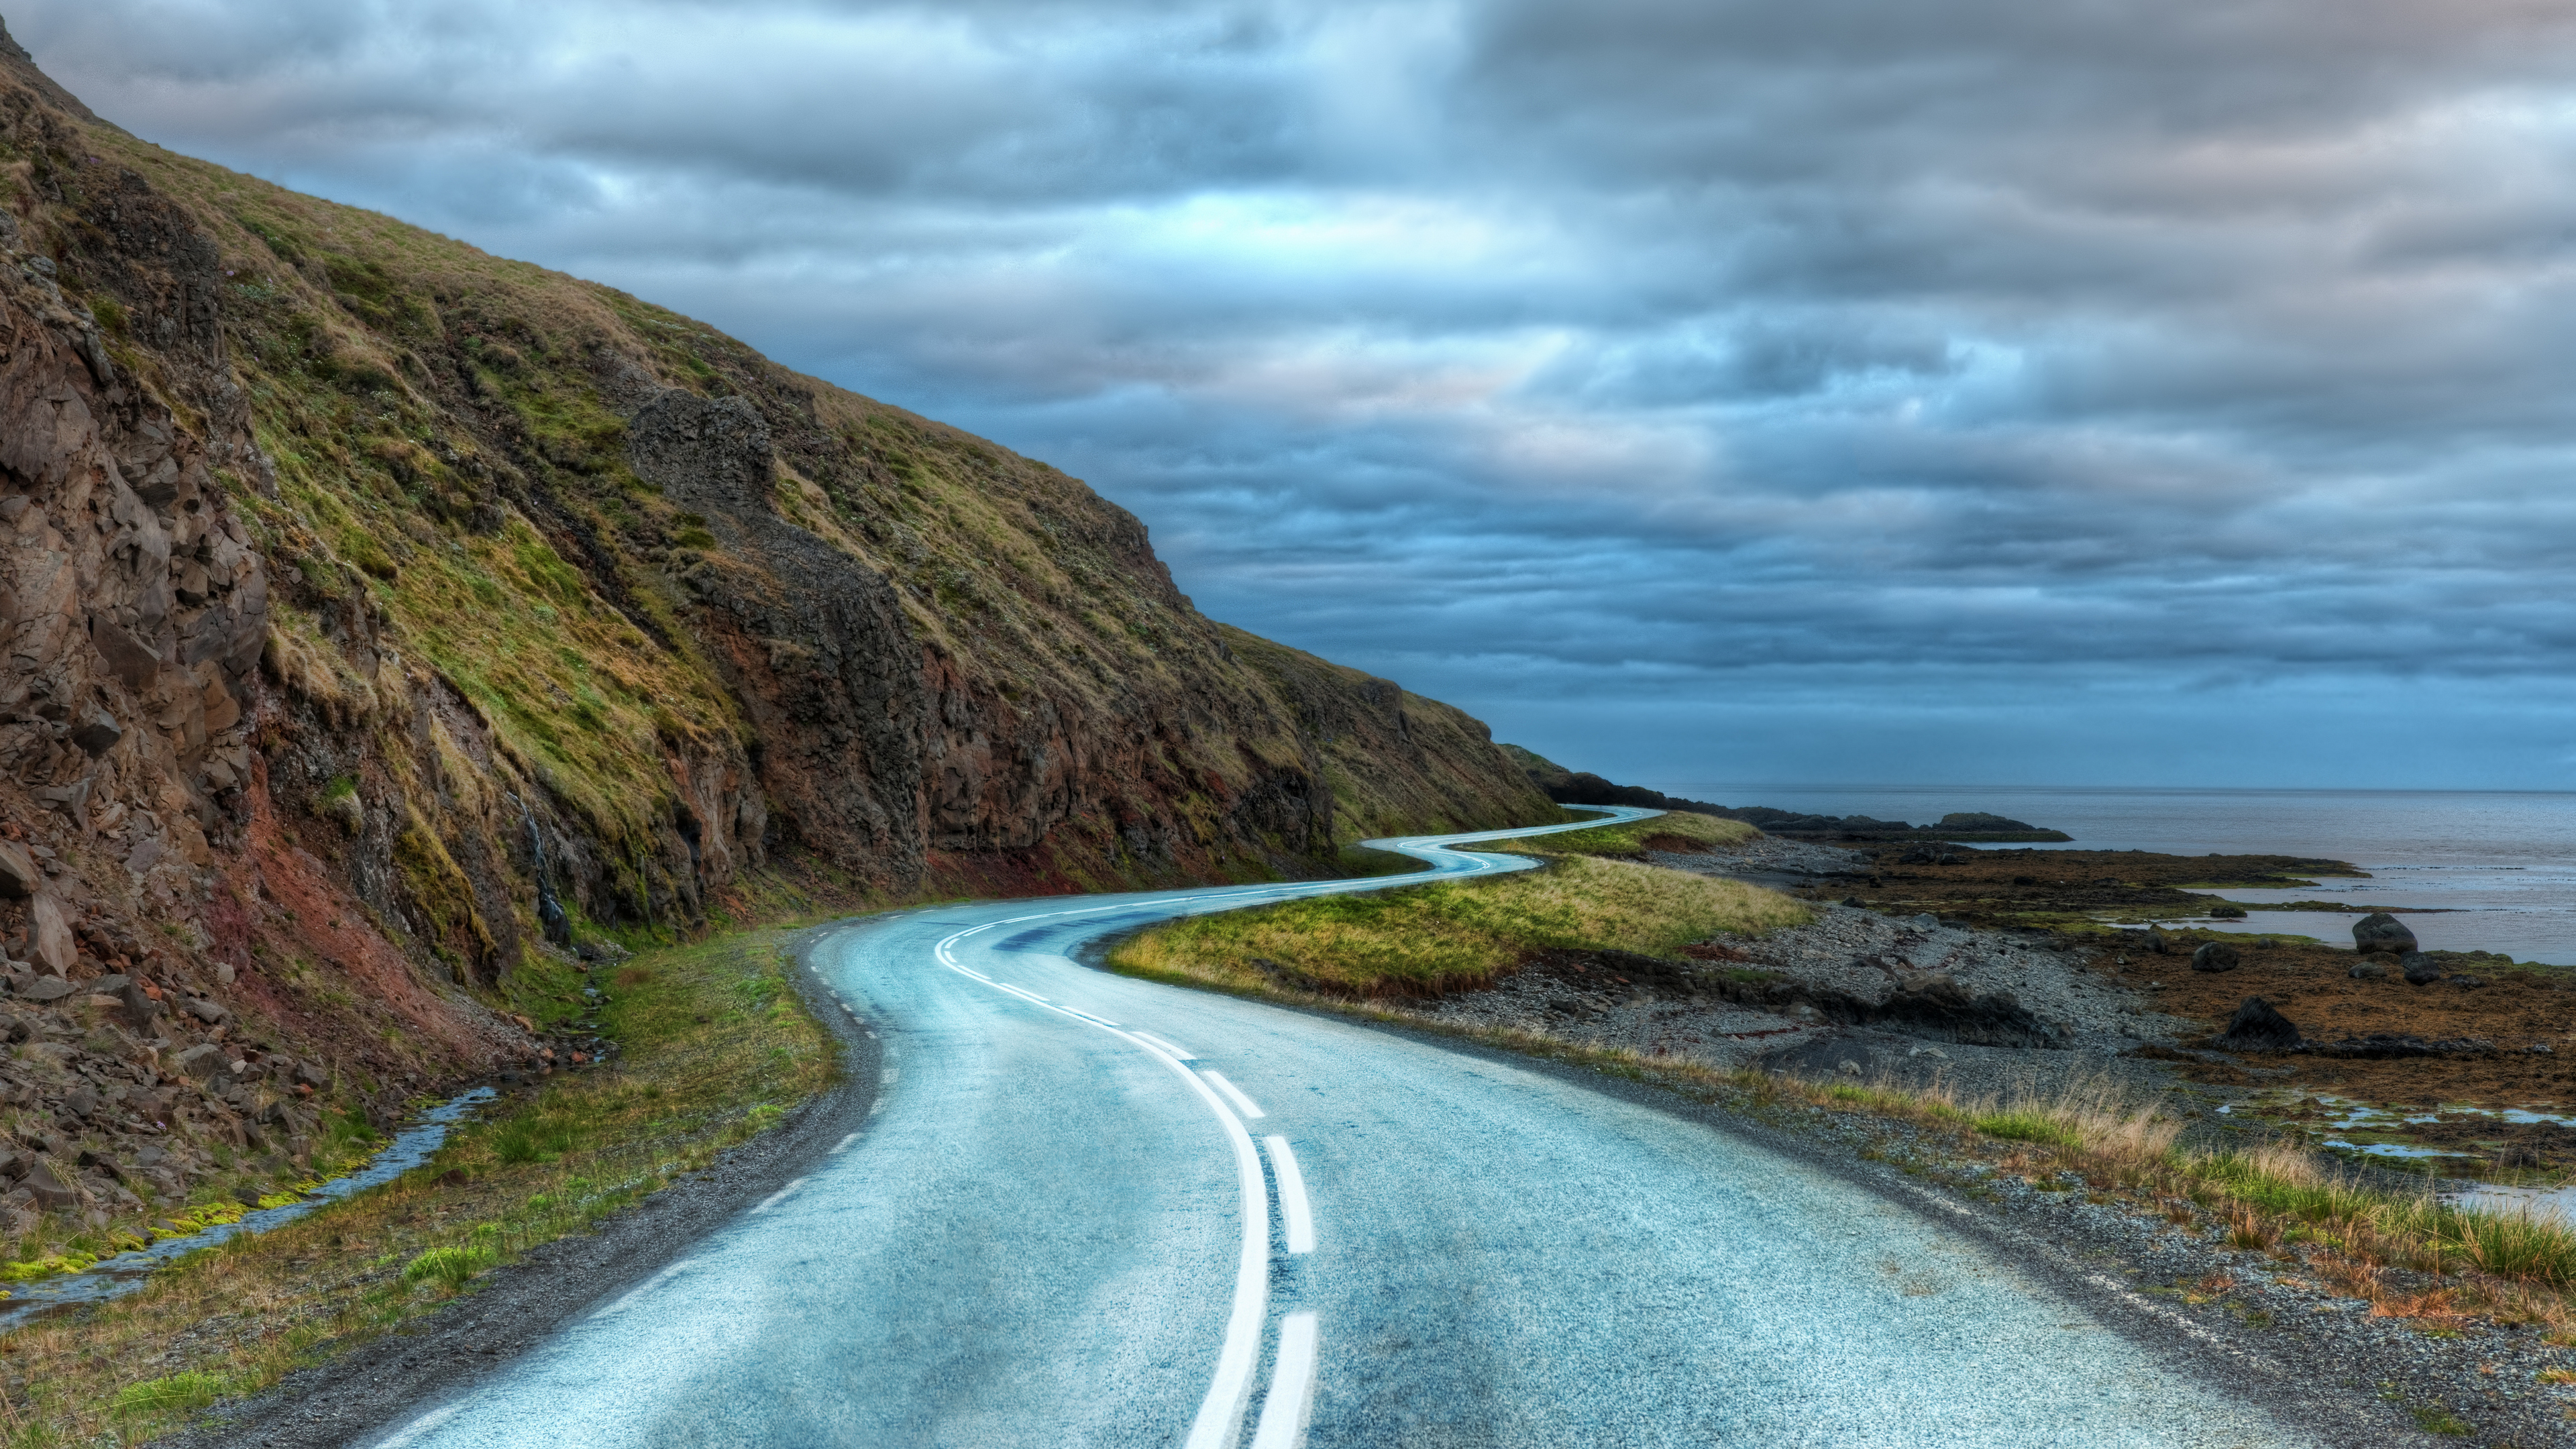 General 3840x2160 photography landscape road outdoors Iceland rocks shore water grass sky clouds curvy road 4K